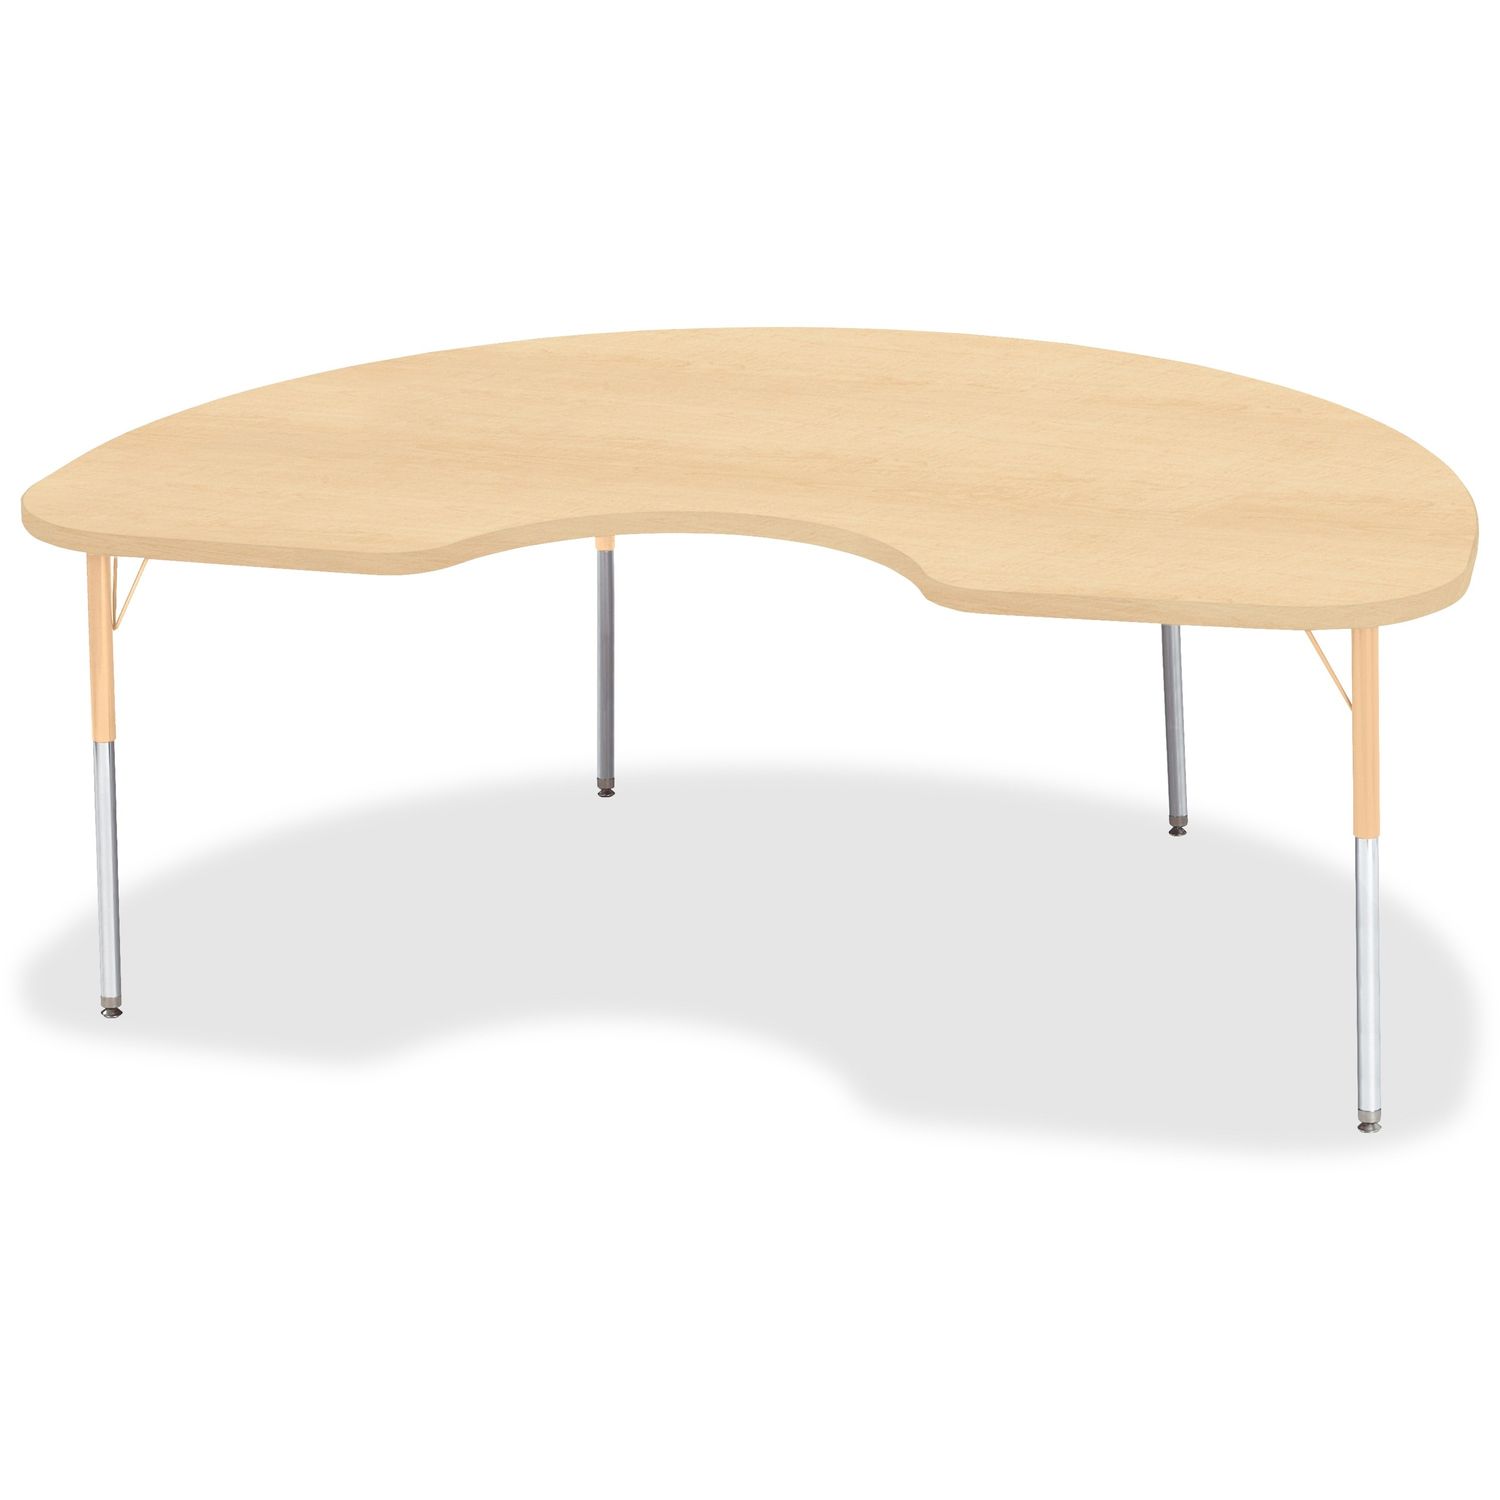 Berries Adult Height Maple Top/Edge Kidney Table Laminated Kidney-shaped, Maple Top, Four Leg Base, 4 Legs, 72" Table Top Length x 48" Table Top Width x 1.13" Table Top Thickness, 31" Height